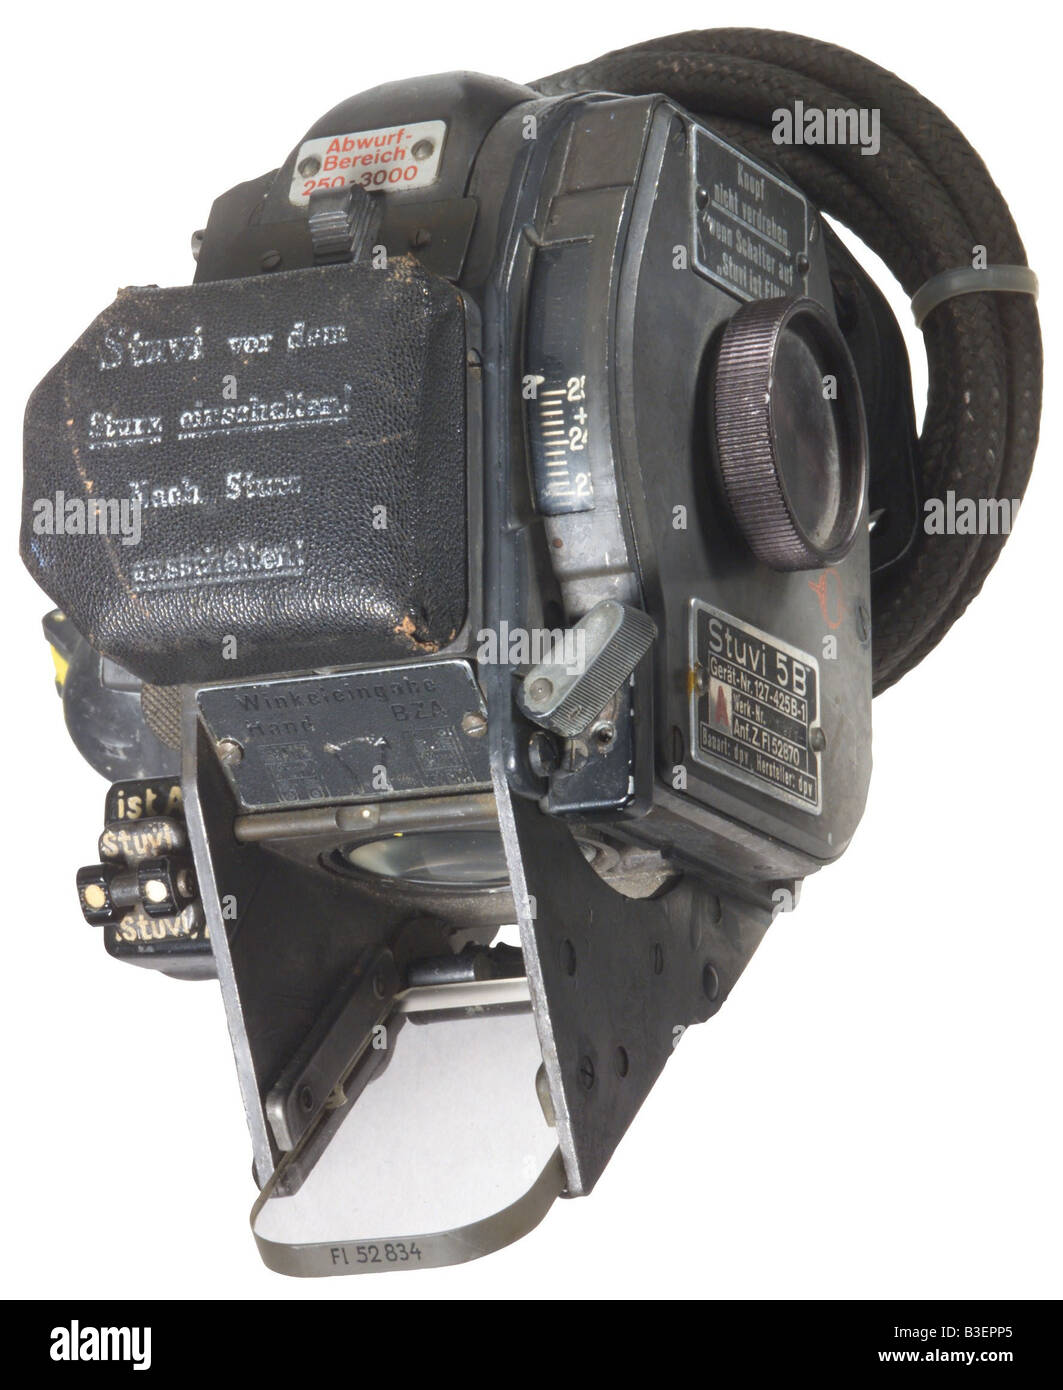 event, Second World War/WWII, aerial warfare, equipment, Germany, instruments, Divebomber Sight Stuvi 5B, circa 1935 - 1945, Luftwaffe, Air Force, 20th century, , Stock Photo